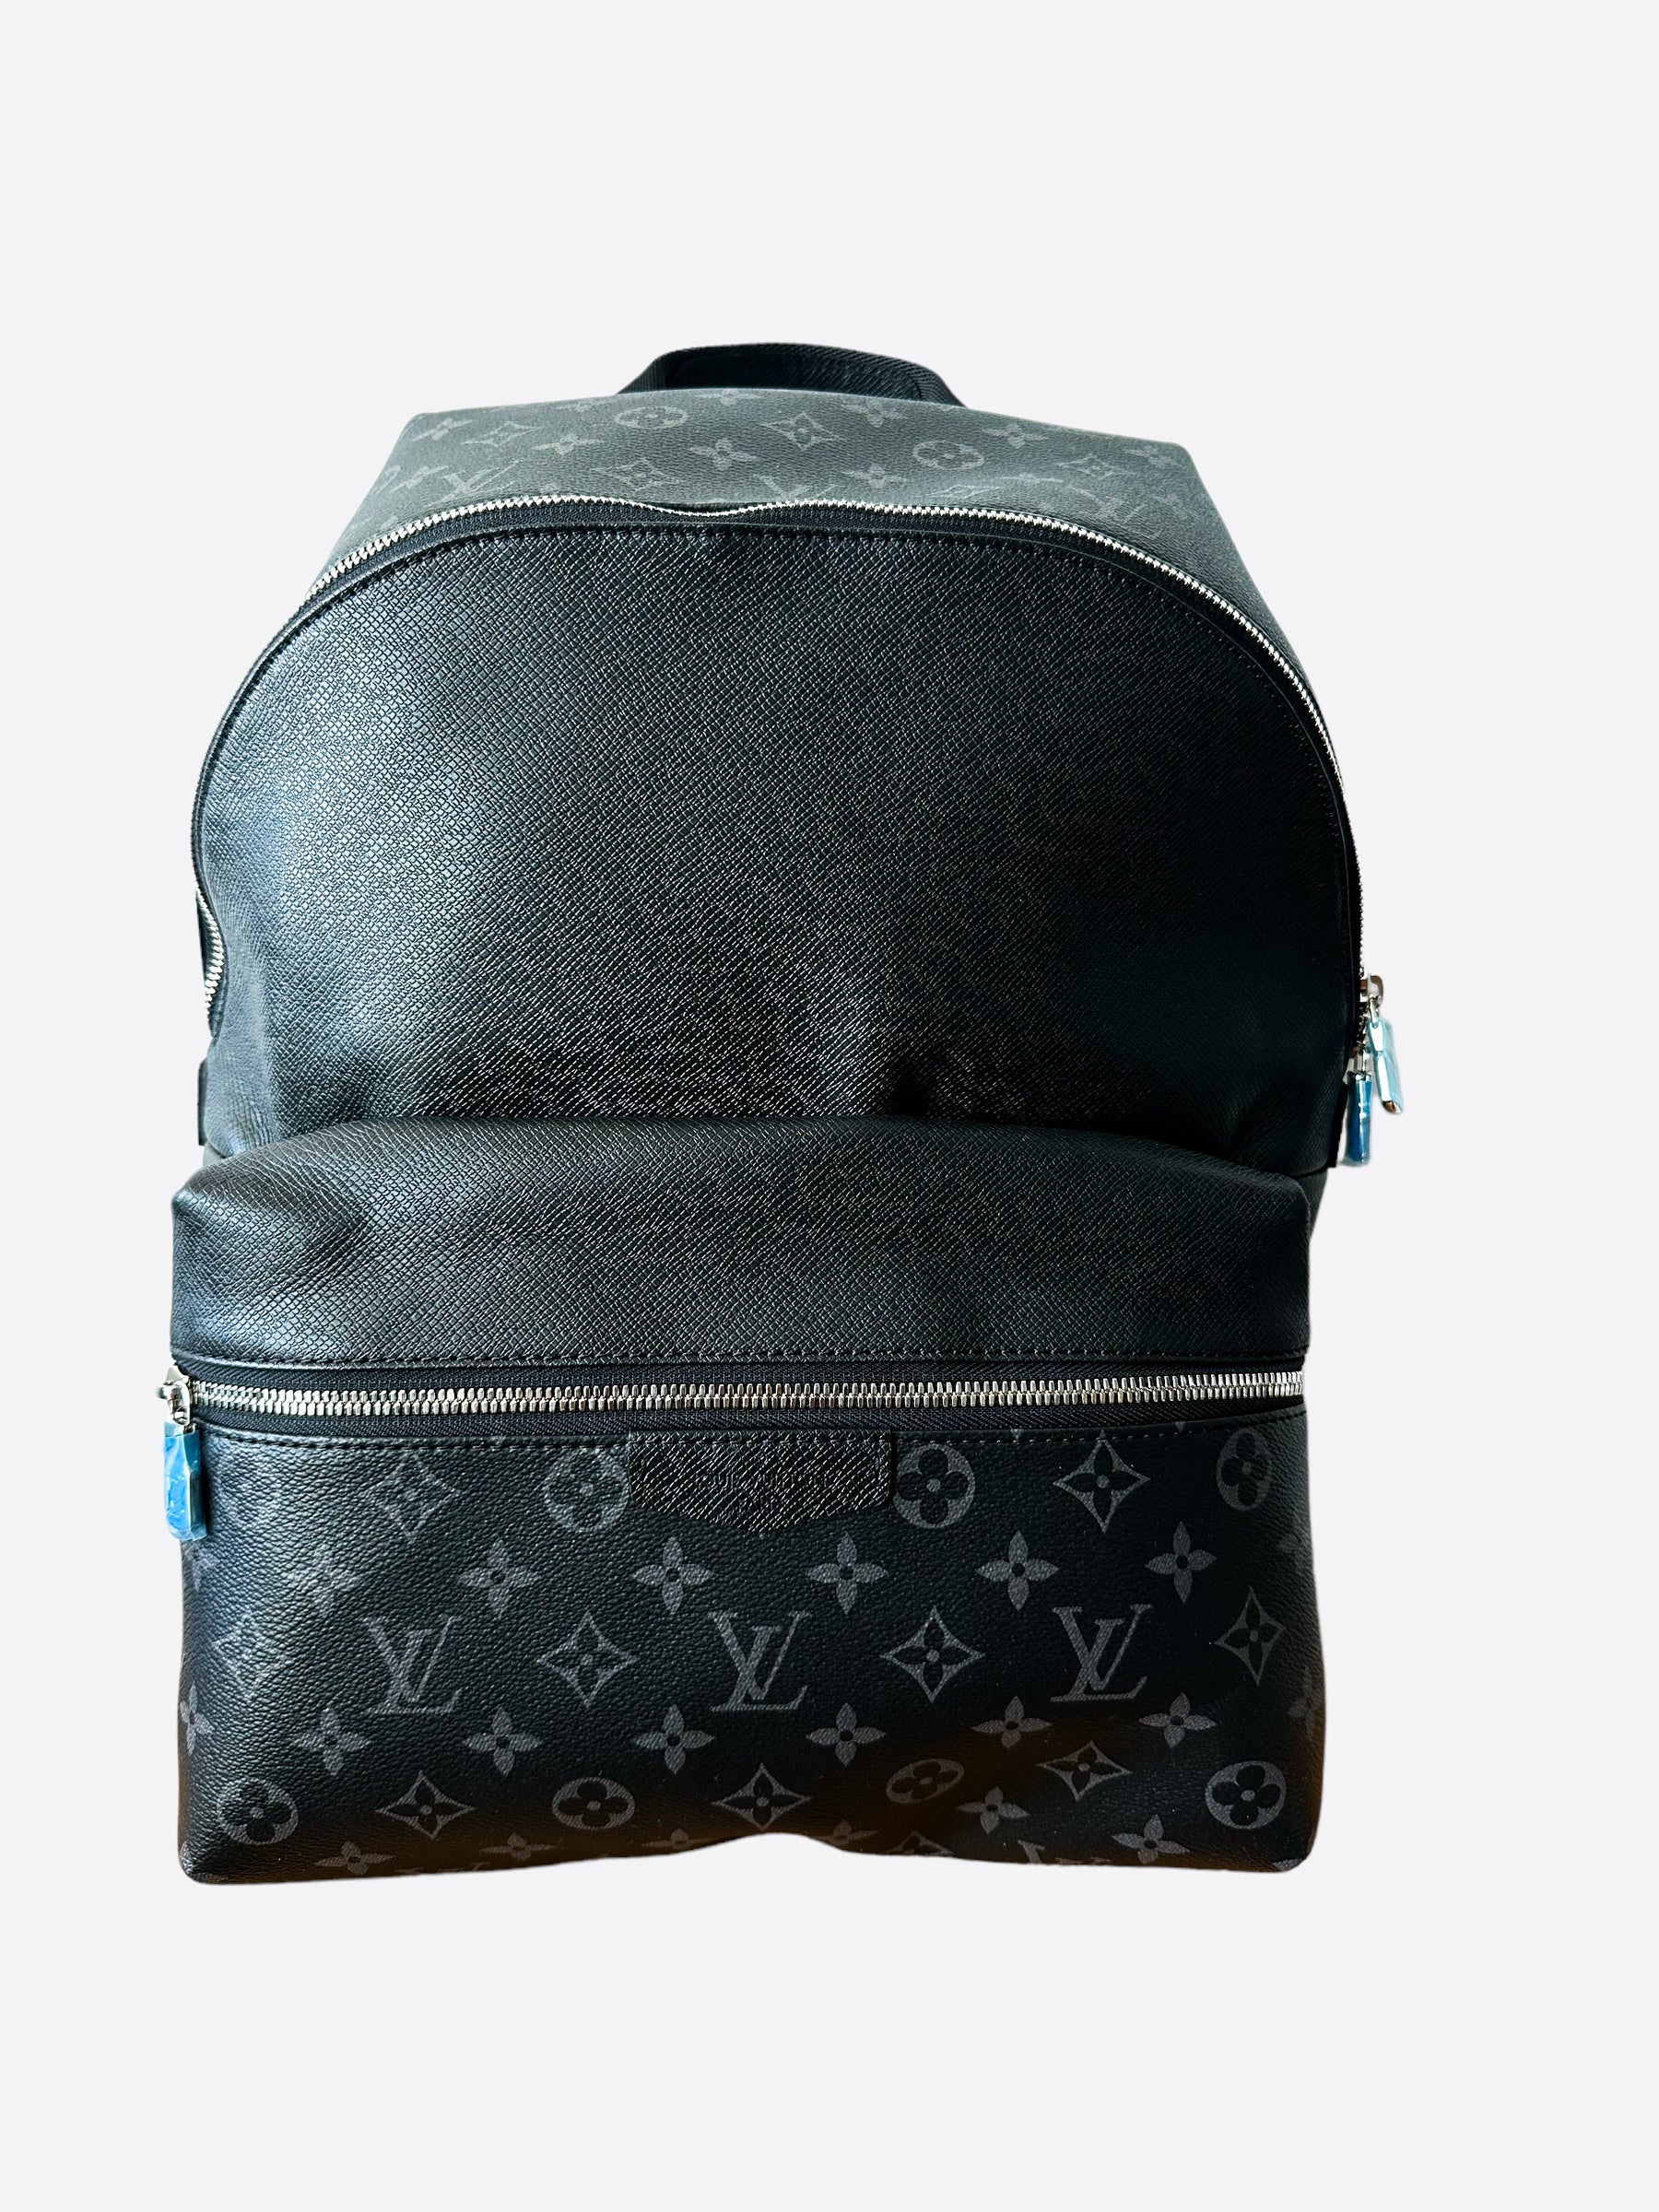 Louis Vuitton Discovery Backpack , very limited Sunset collection by Virgil  Abloh at 1stDibs